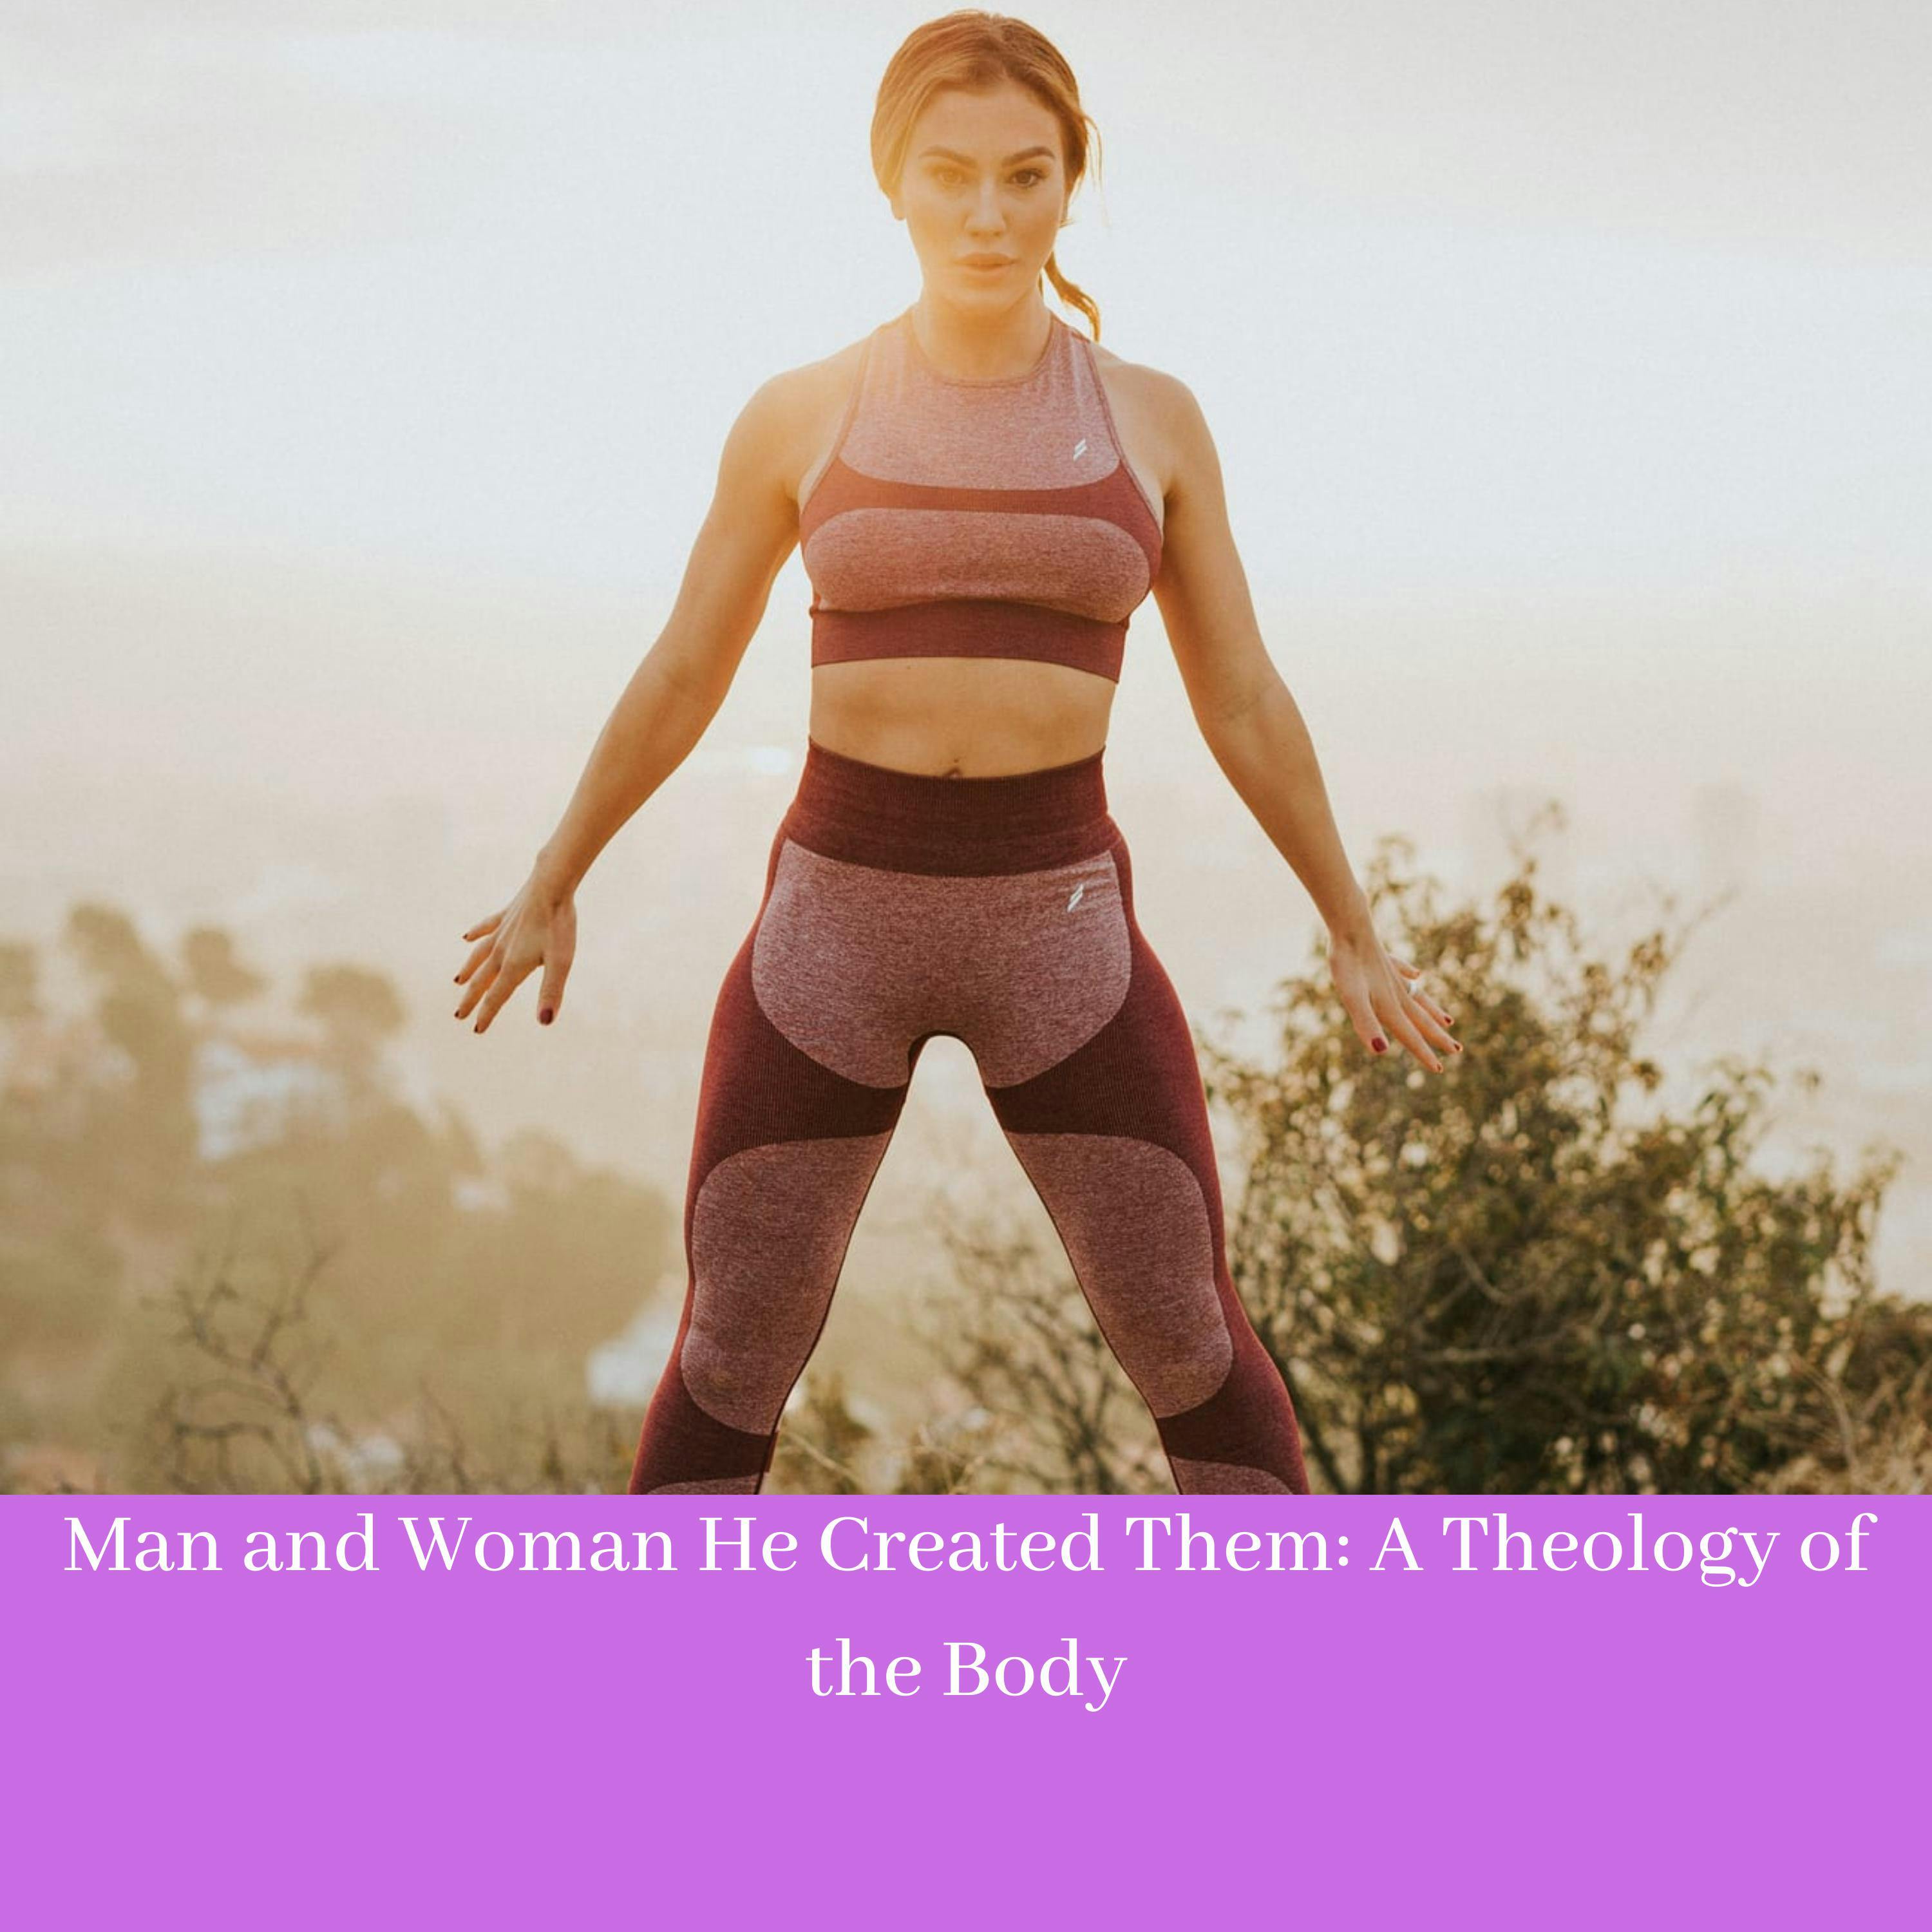 Man and Woman He Created Them: A Theology of the Body      Man and Woman He Created Them: A Theology of the Body - undefined